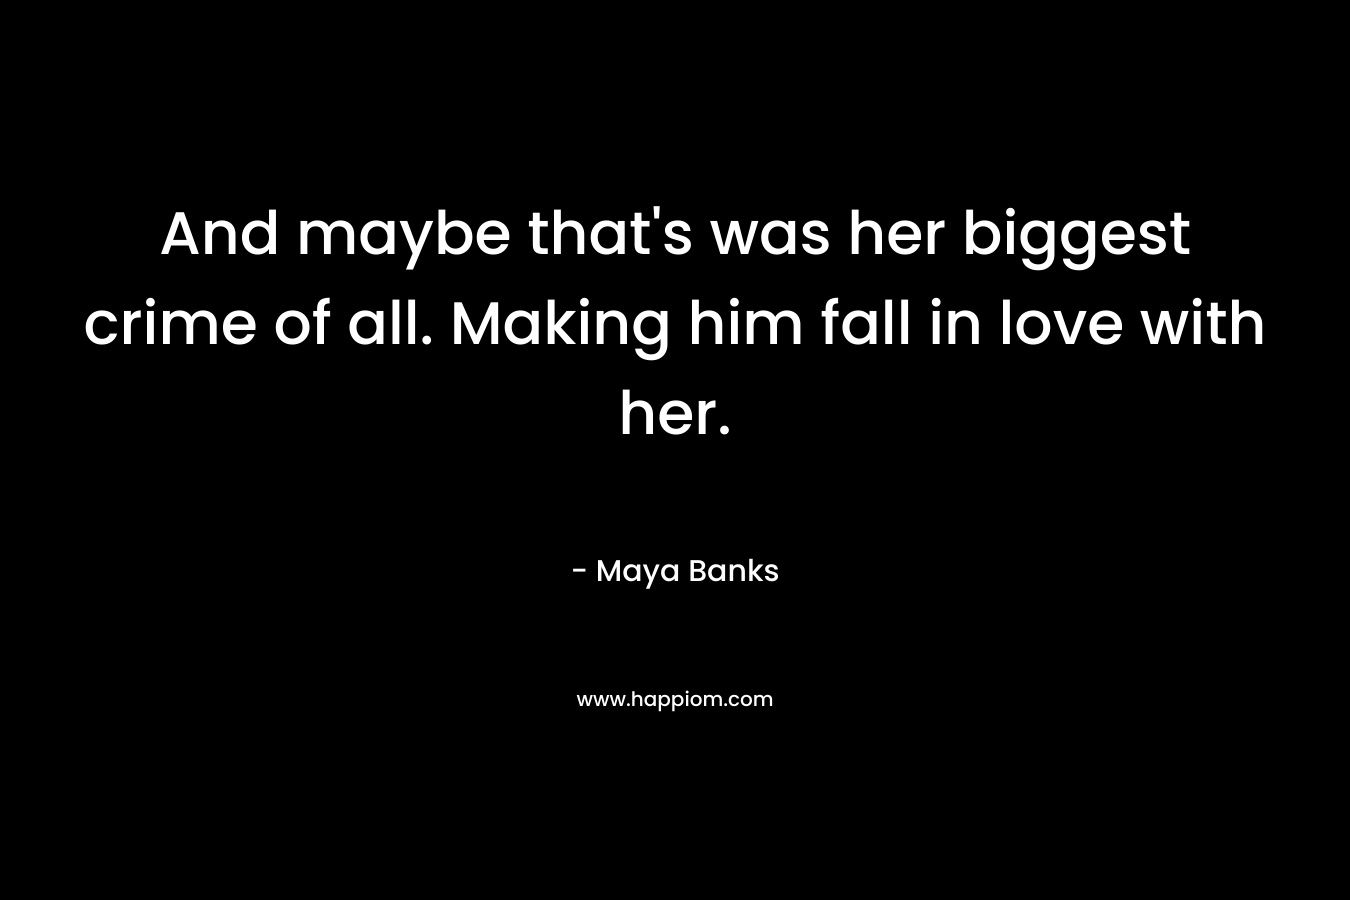 And maybe that's was her biggest crime of all. Making him fall in love with her.